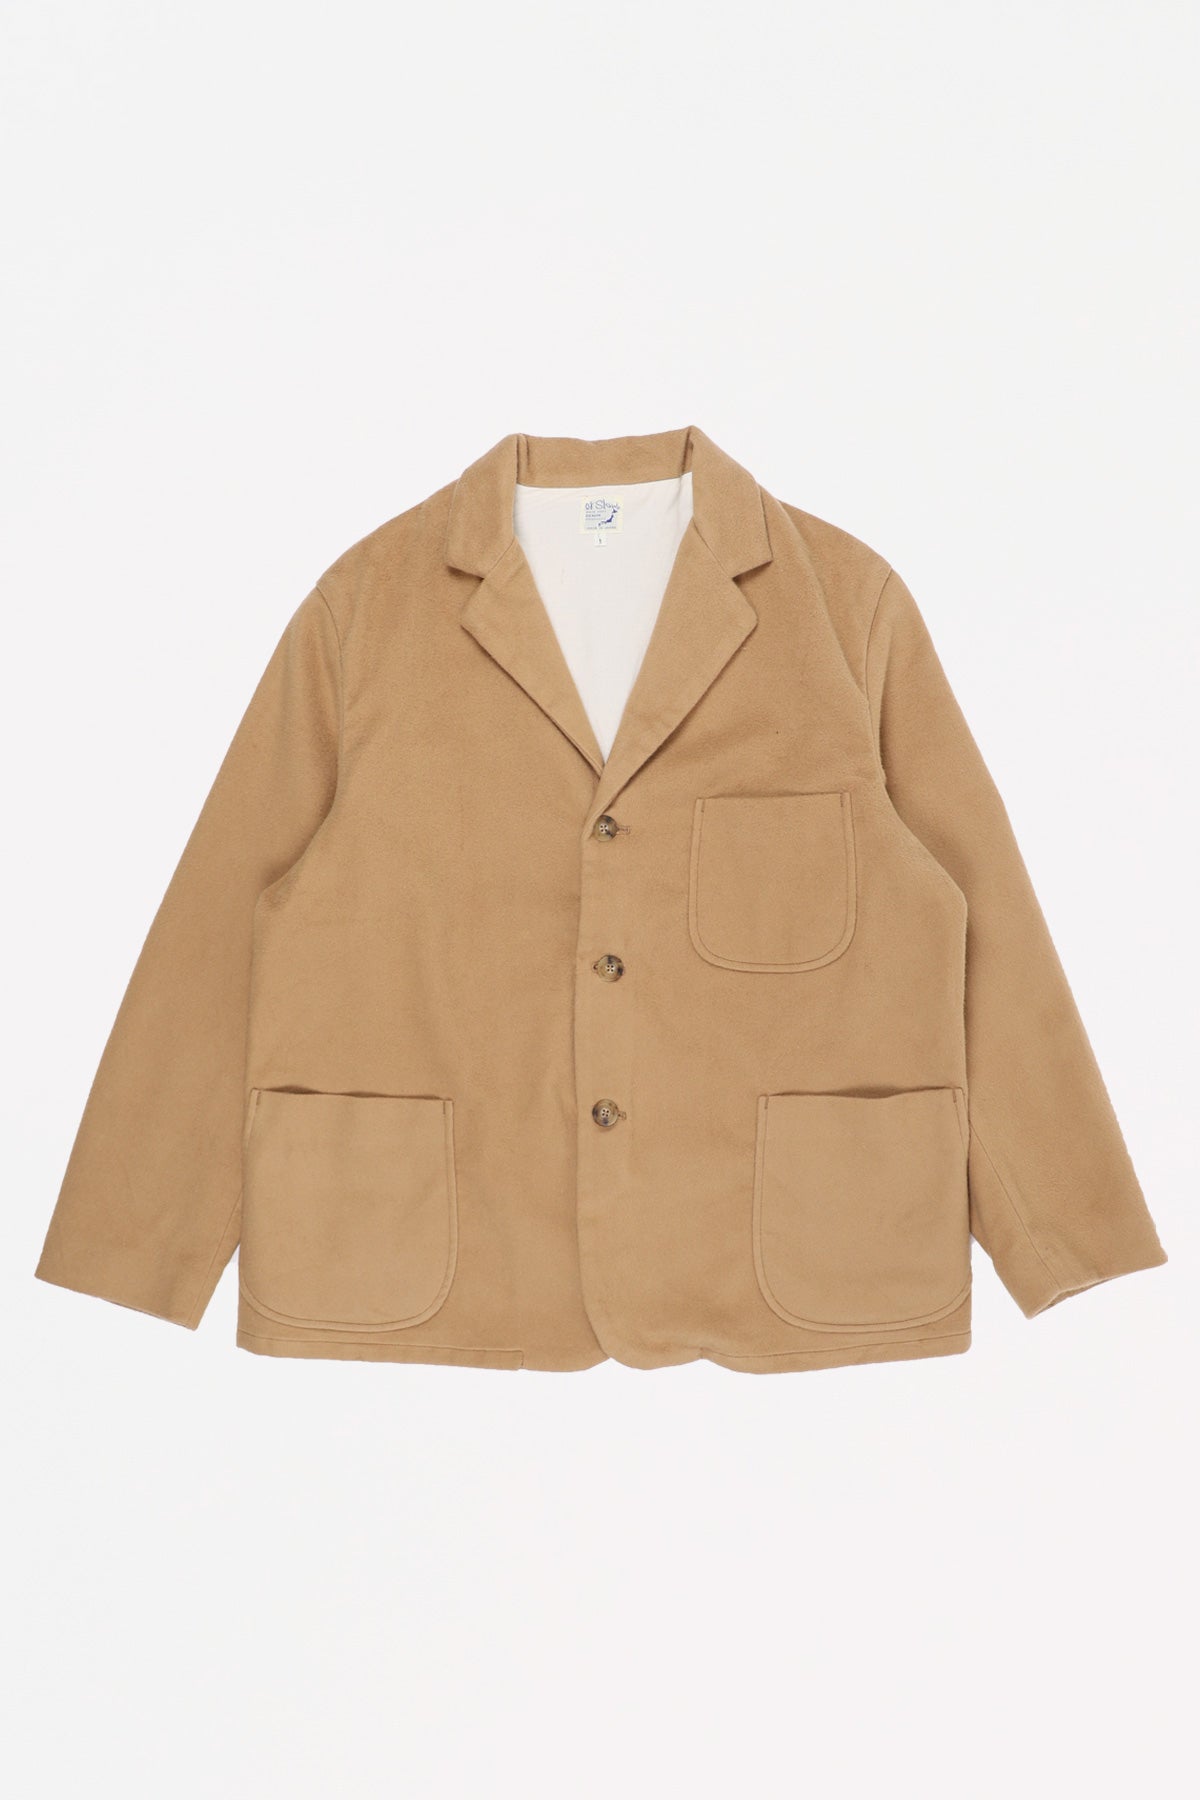 Relaxed Fit Like-Cashmere Jacket - Camel